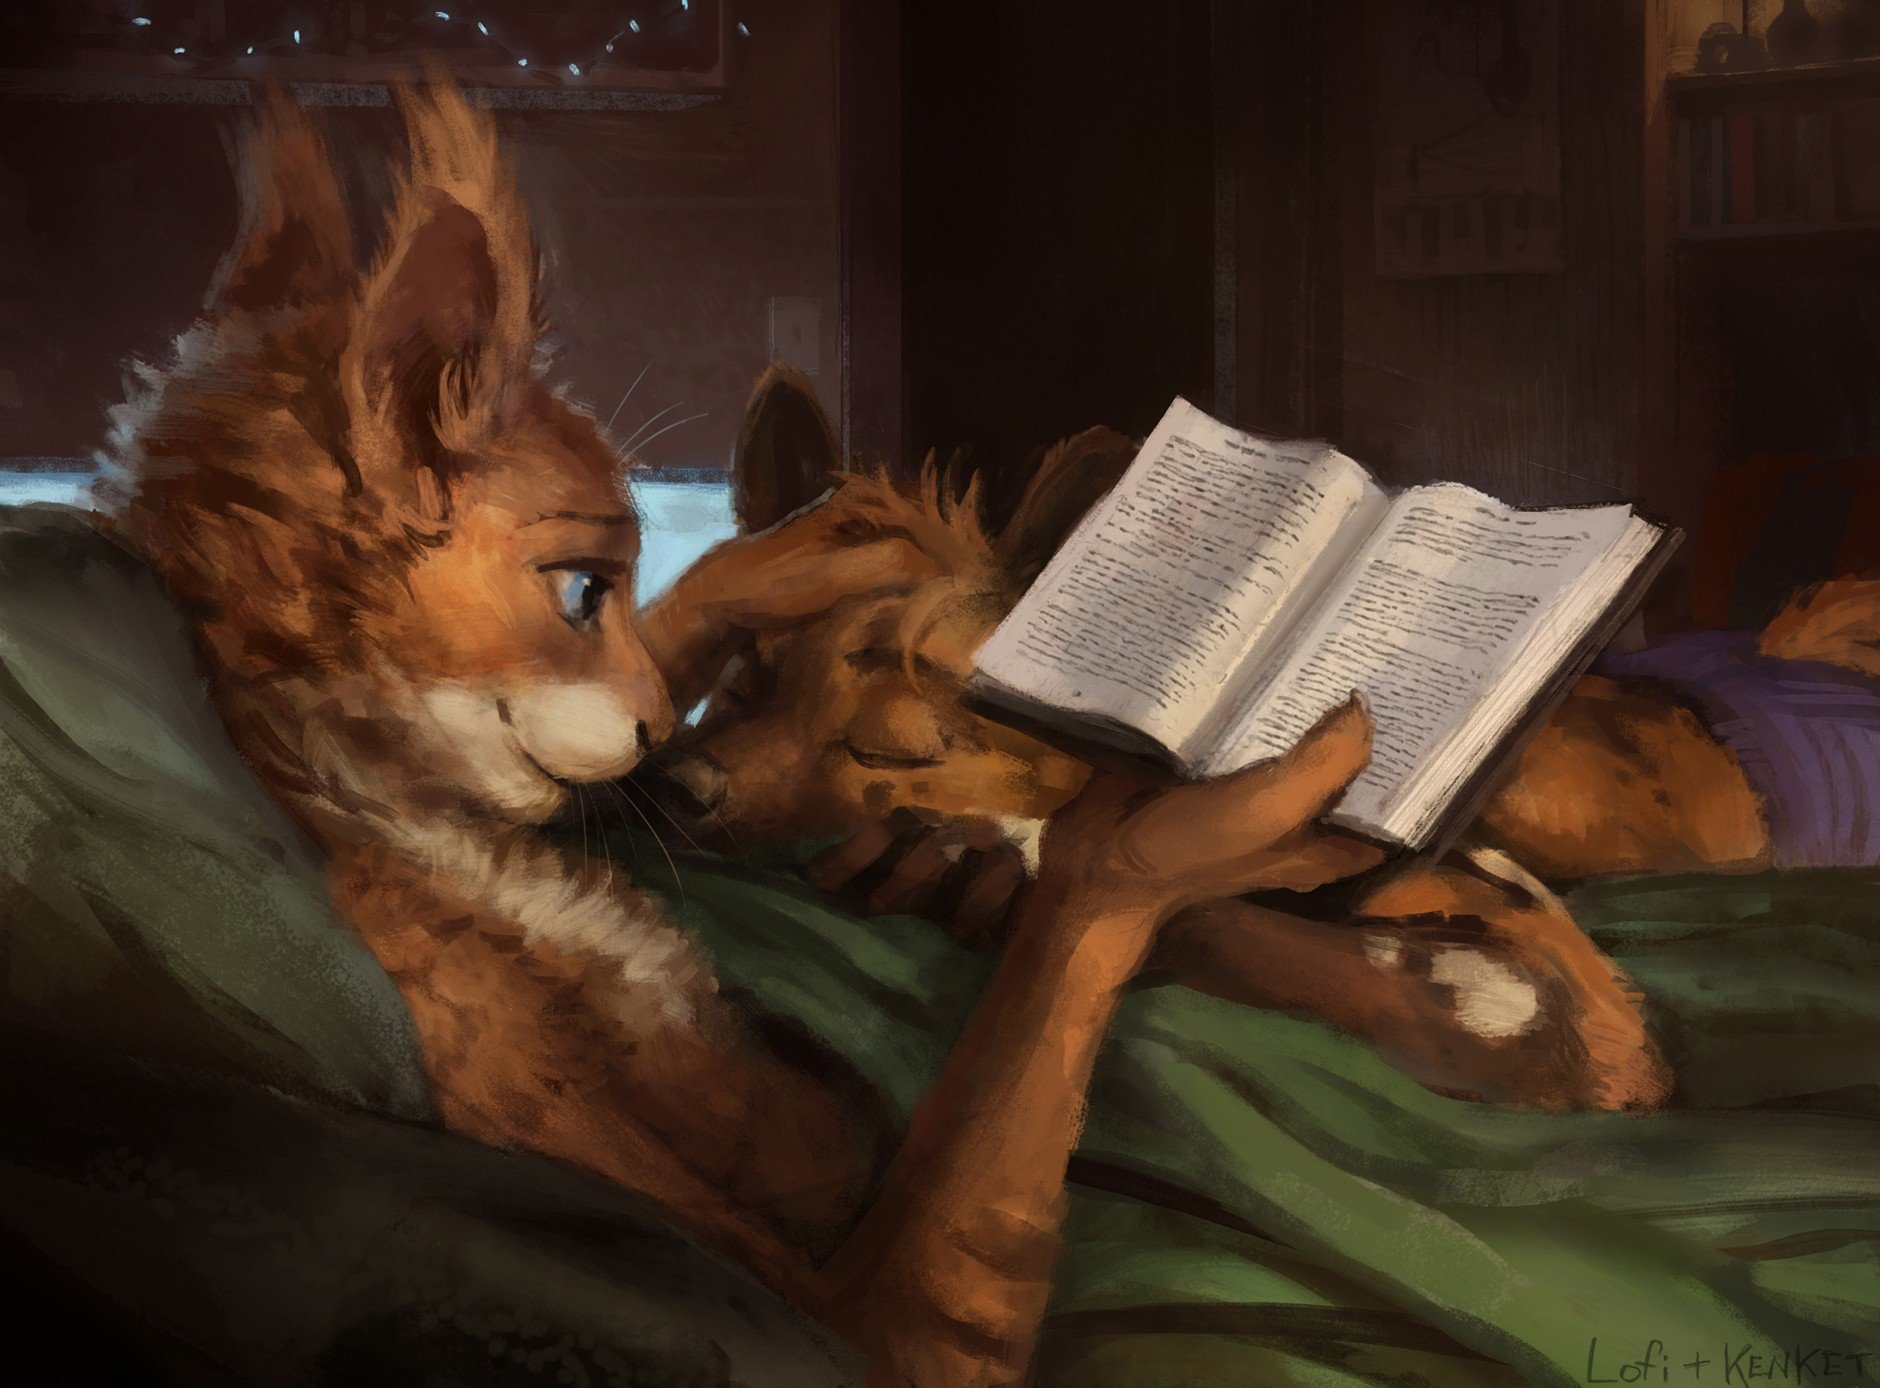 Anthro, In bed, Couple, Furry, Reading Wallpaper